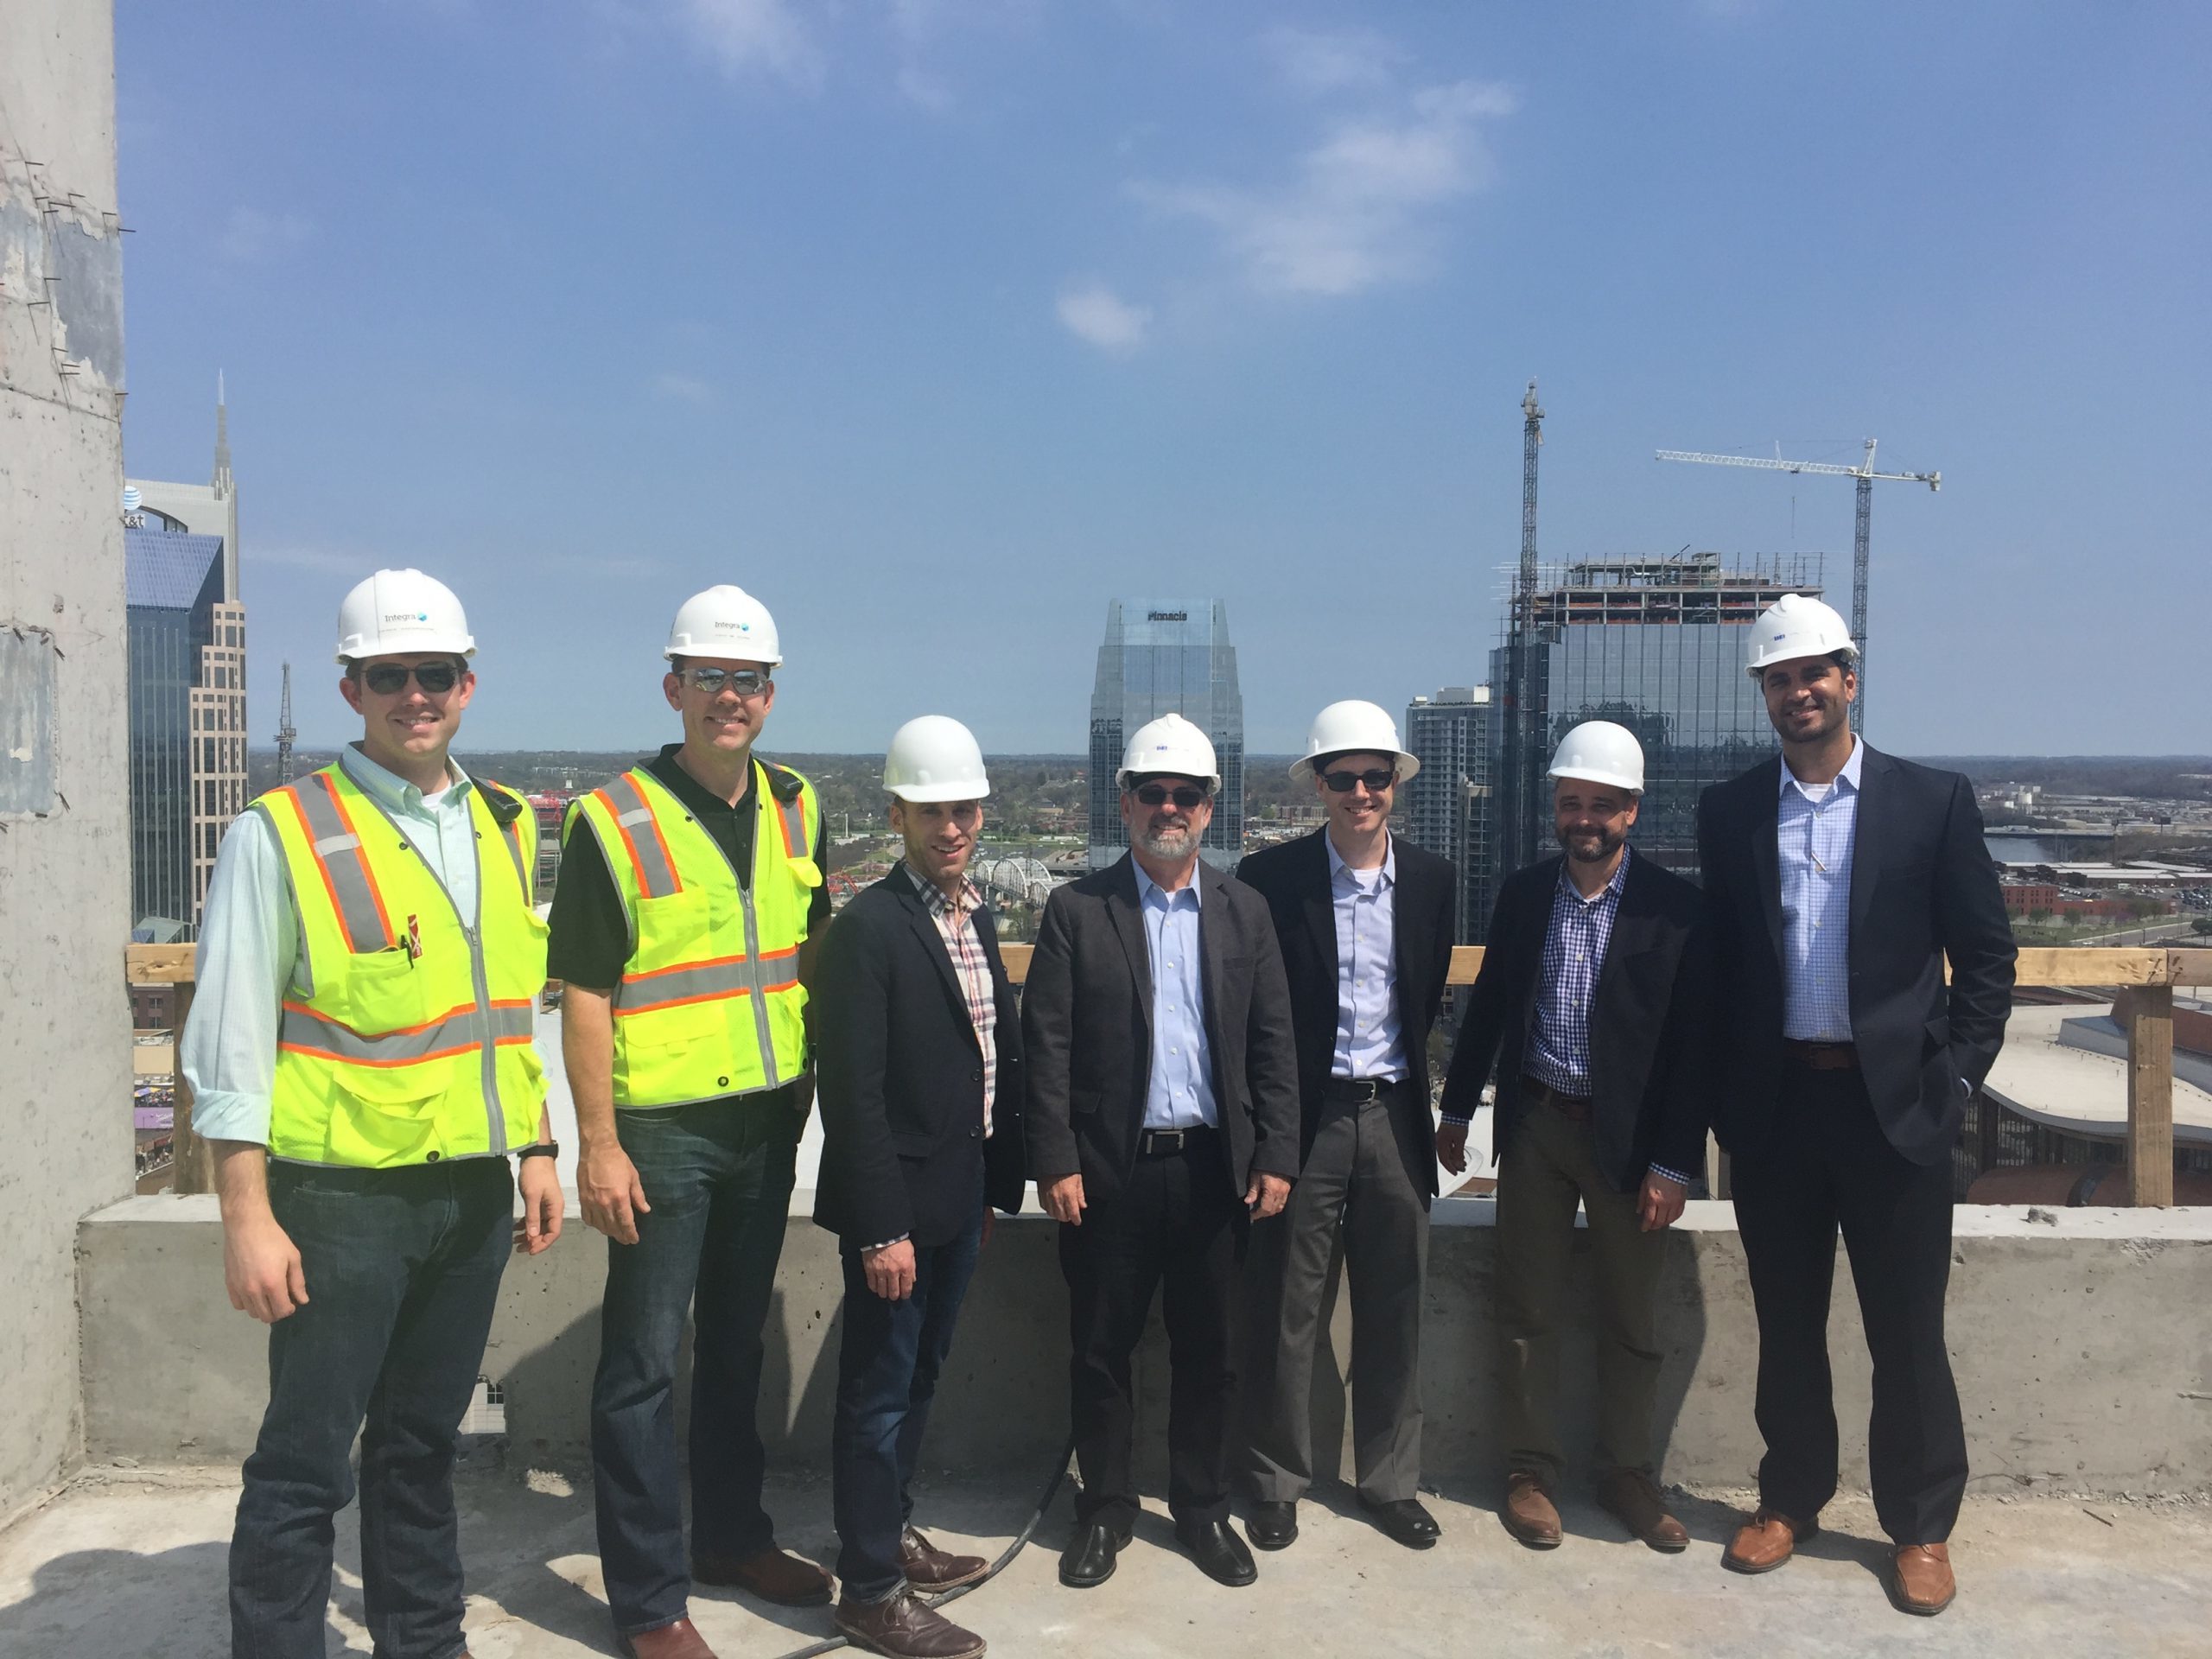 Cambria Hotel & Suites Nashville celebrates topping off ceremony